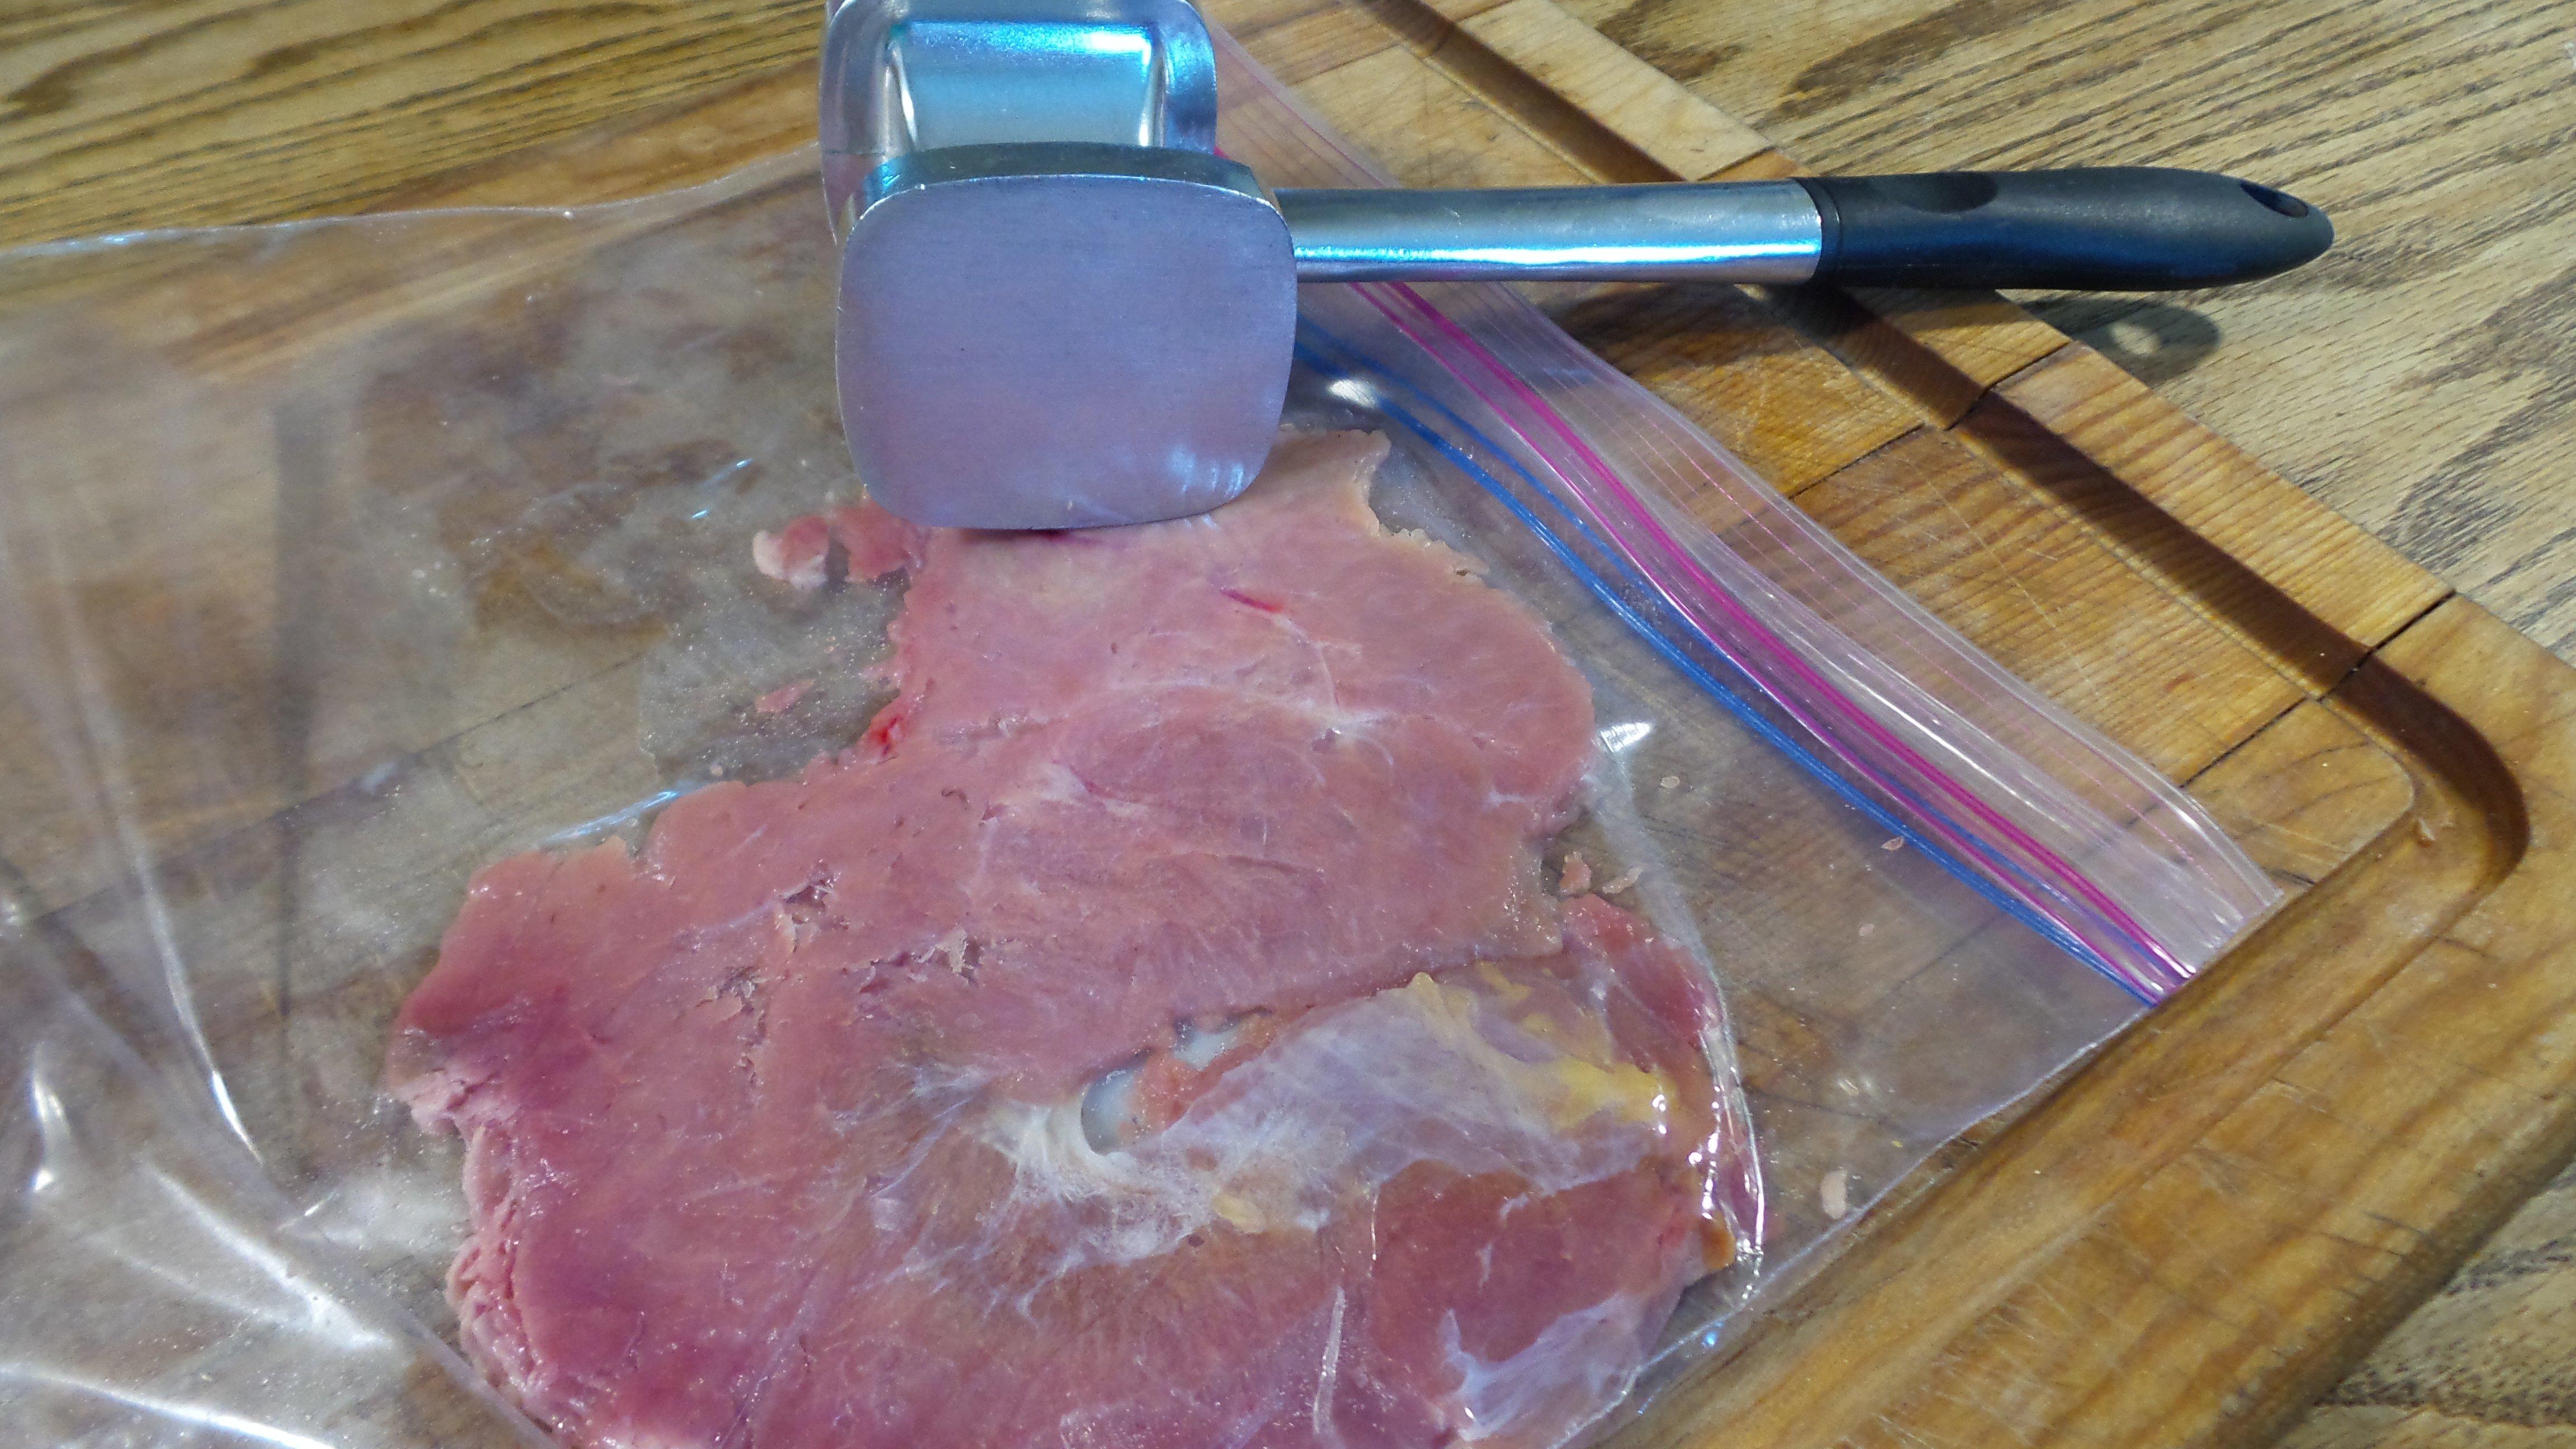 Pound each cutlet flat with a smooth meat mallet.